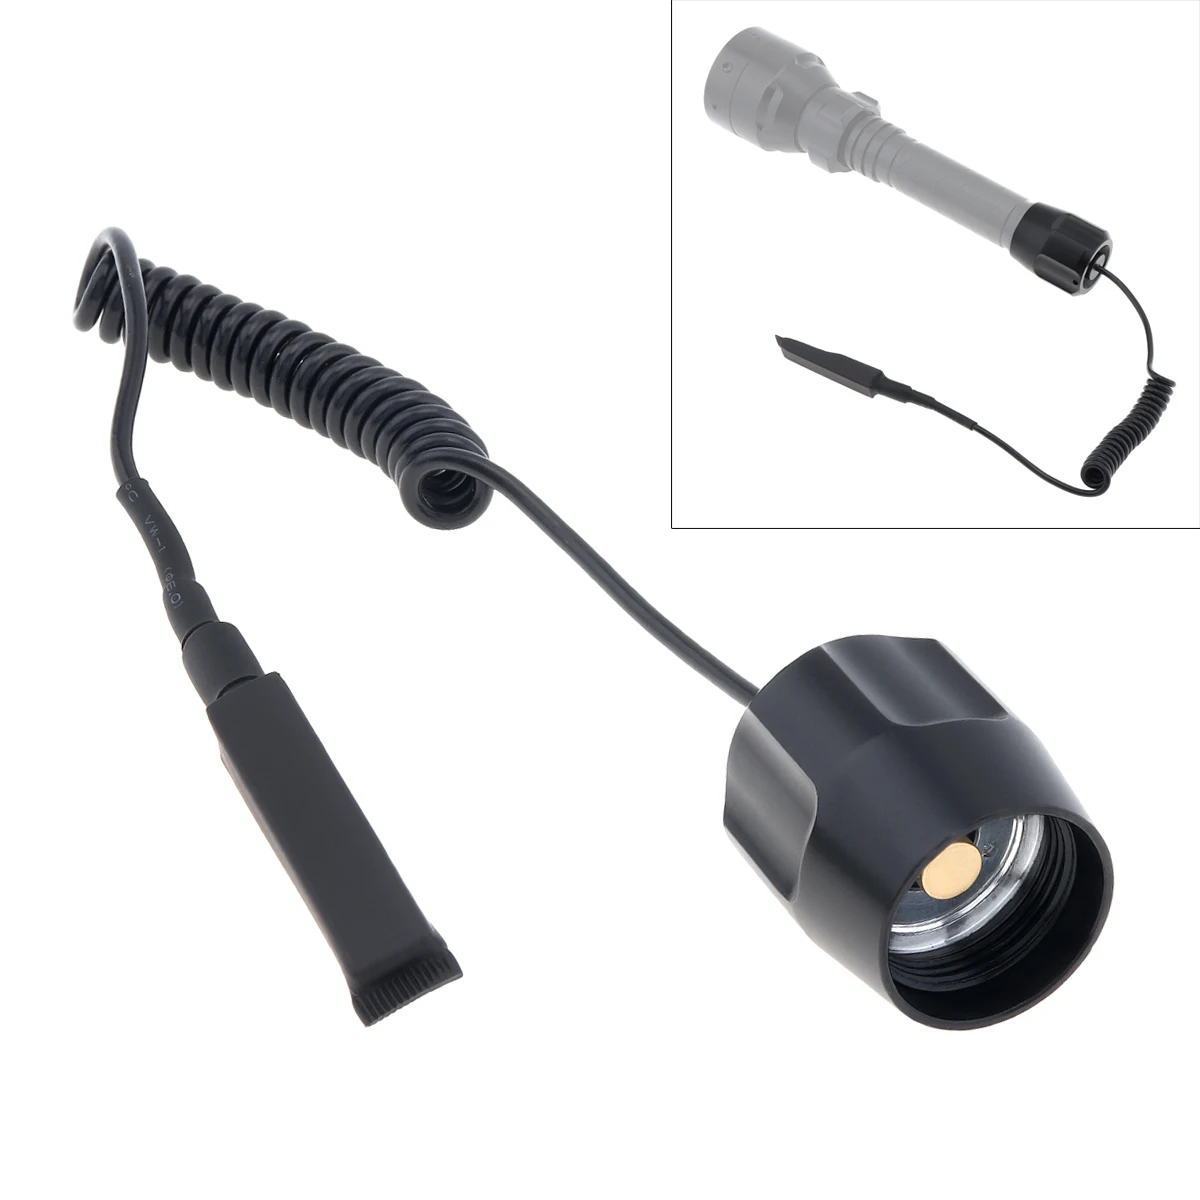 2 Buttons full metal Remote Pressure Switch stretchable tail switch Fit for T50 Zoomable LED Torch Tactical / Hunting Flashlight best tactical torch